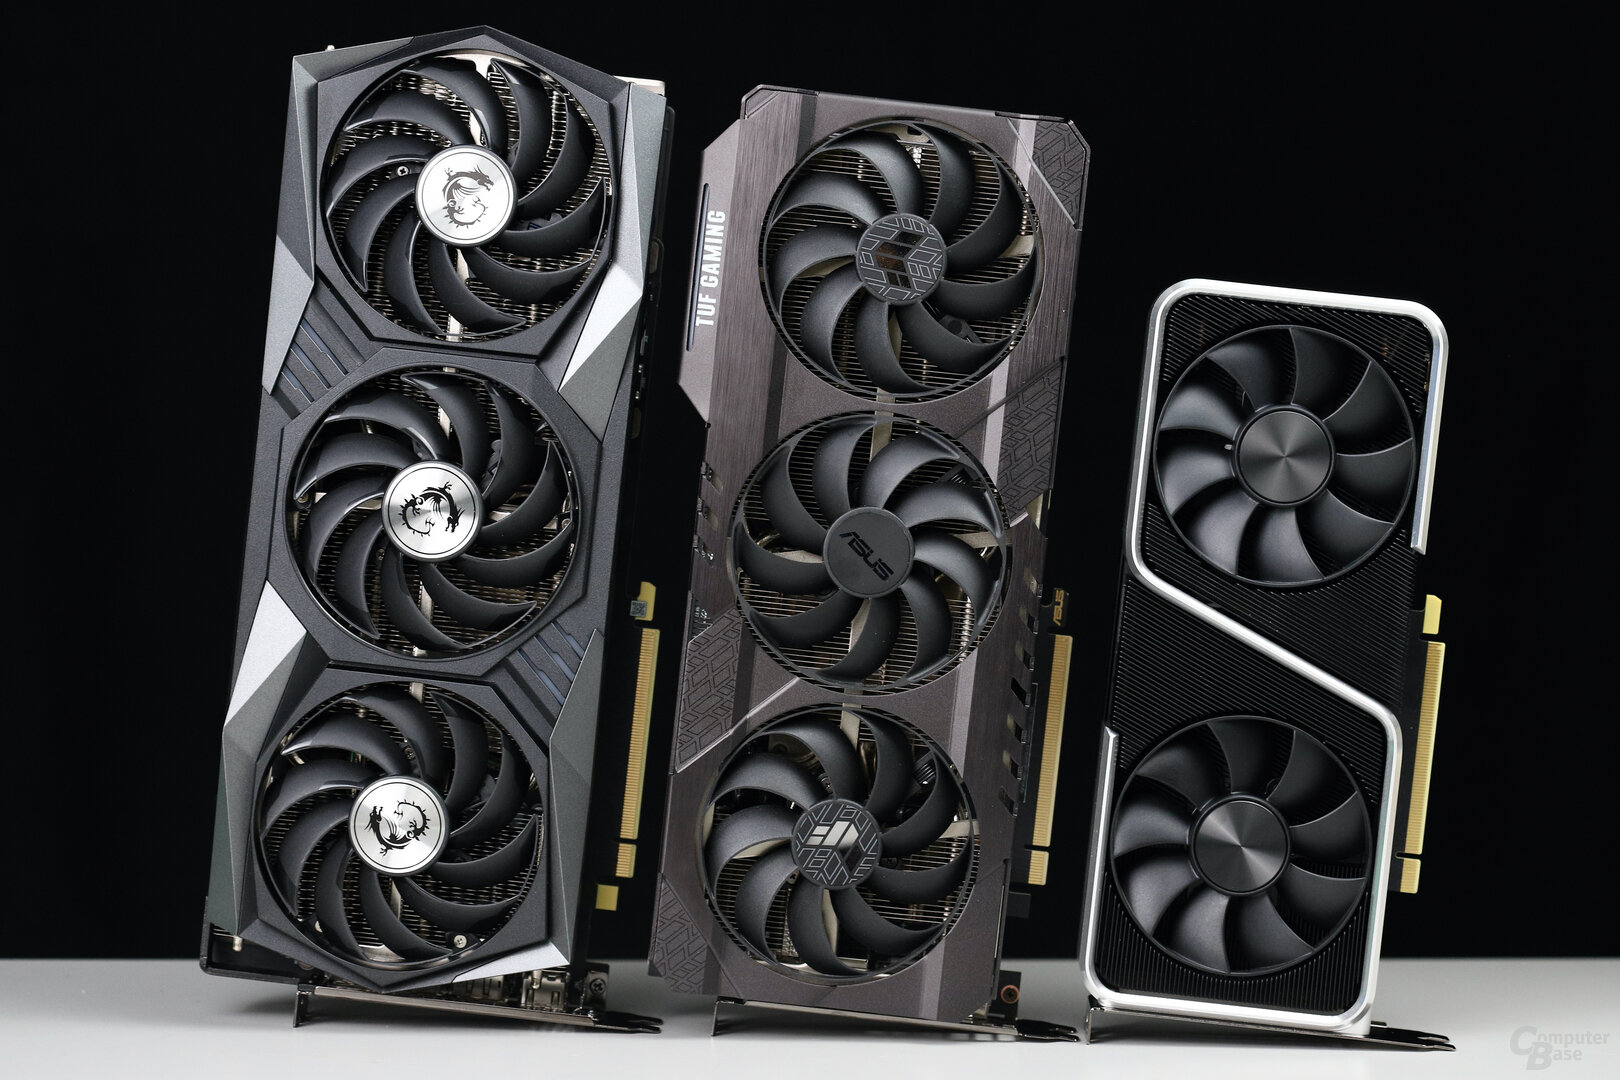 MSI Gaming X (left), Asus TUF (middle) and Nvidia FE (right)